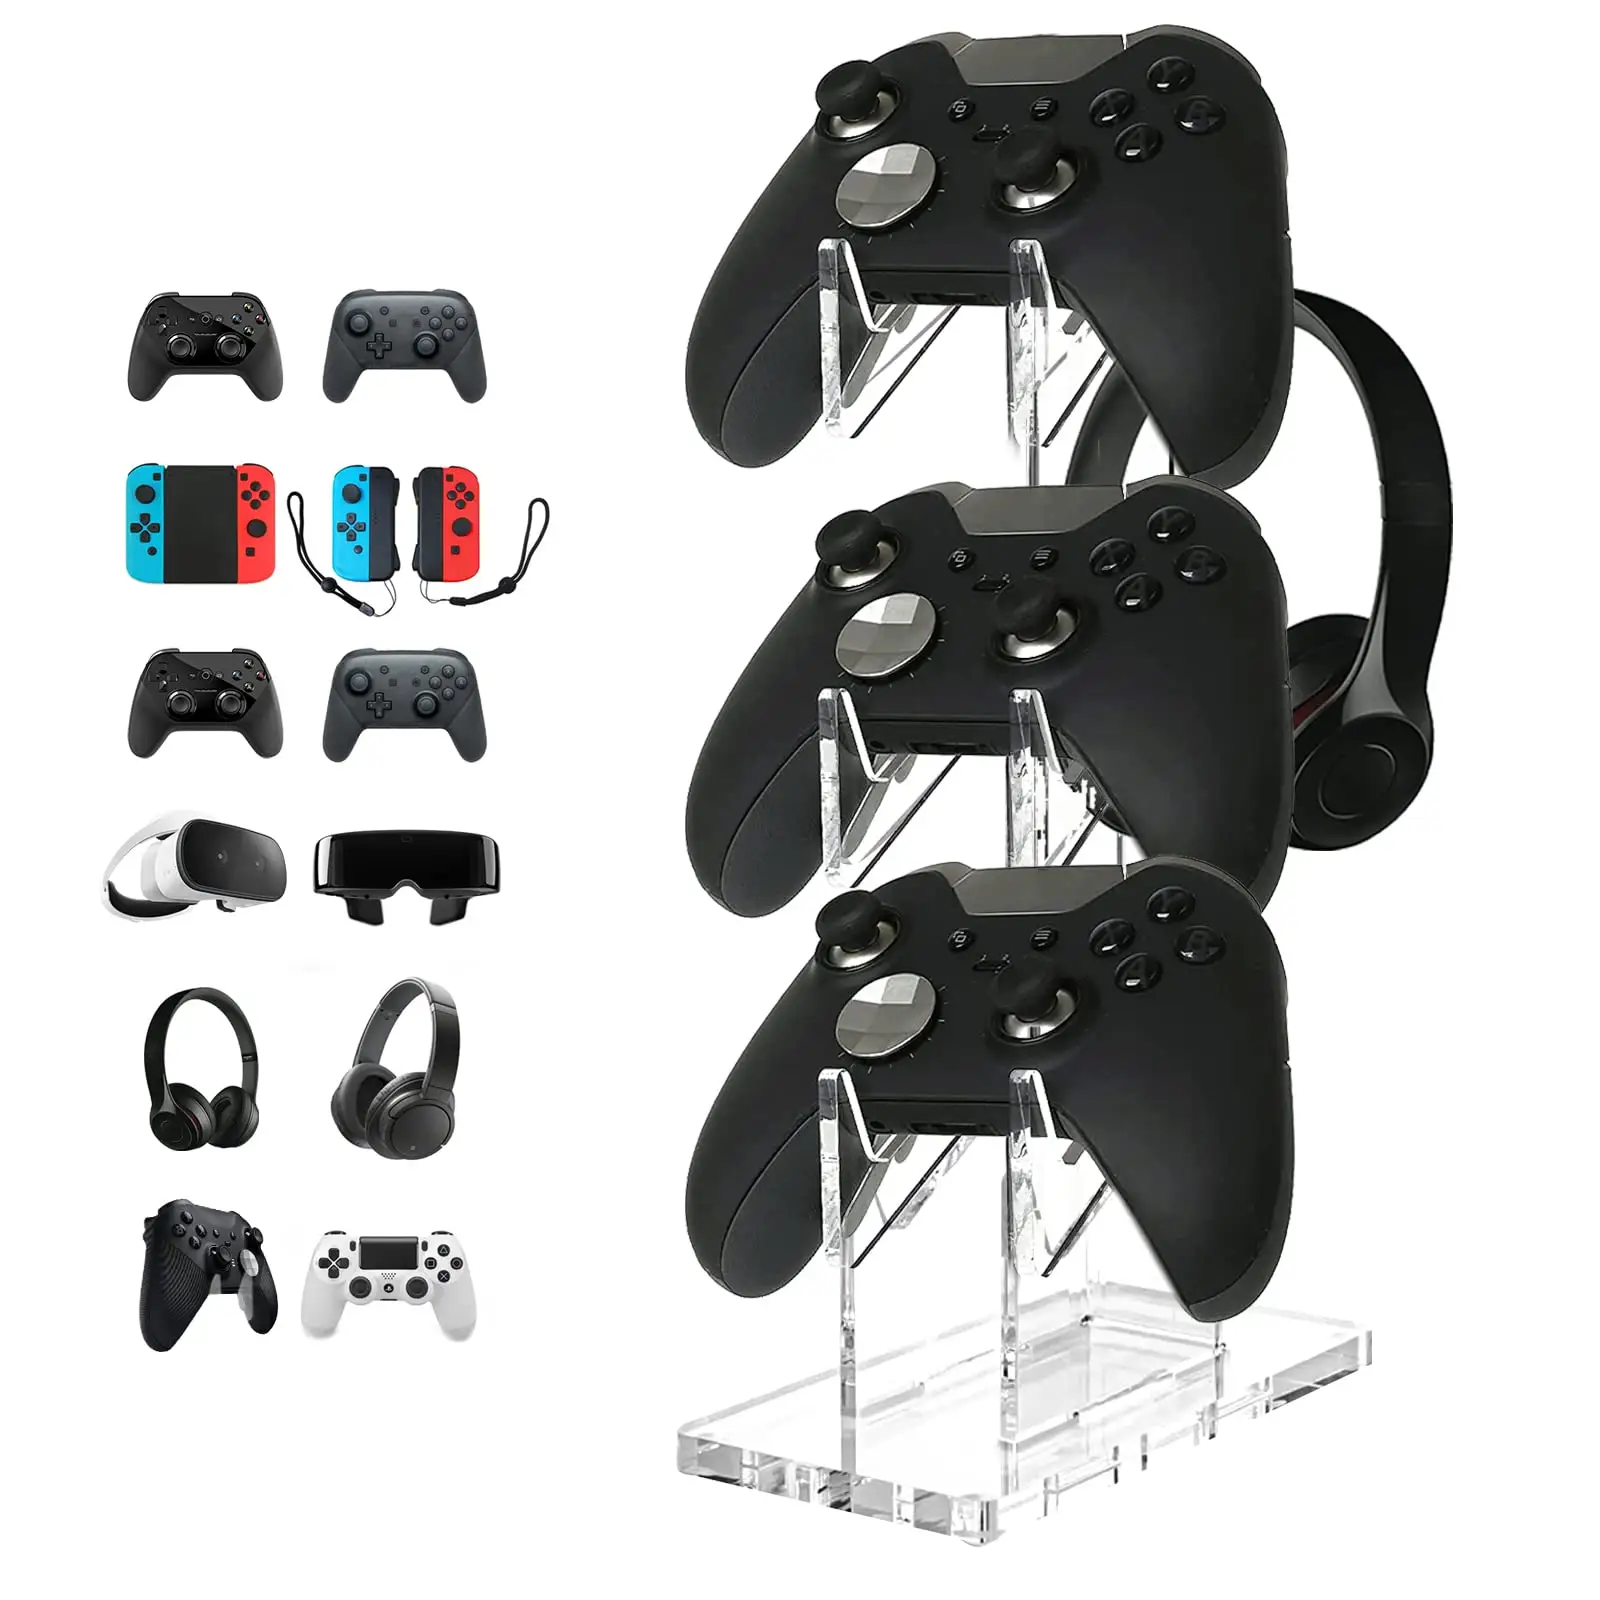 Acrylic Gamepad Stand for PS5/PS4/Xbox One/S/X Series Game Console Controller Stander Gaming Handle Display Hook Accessories